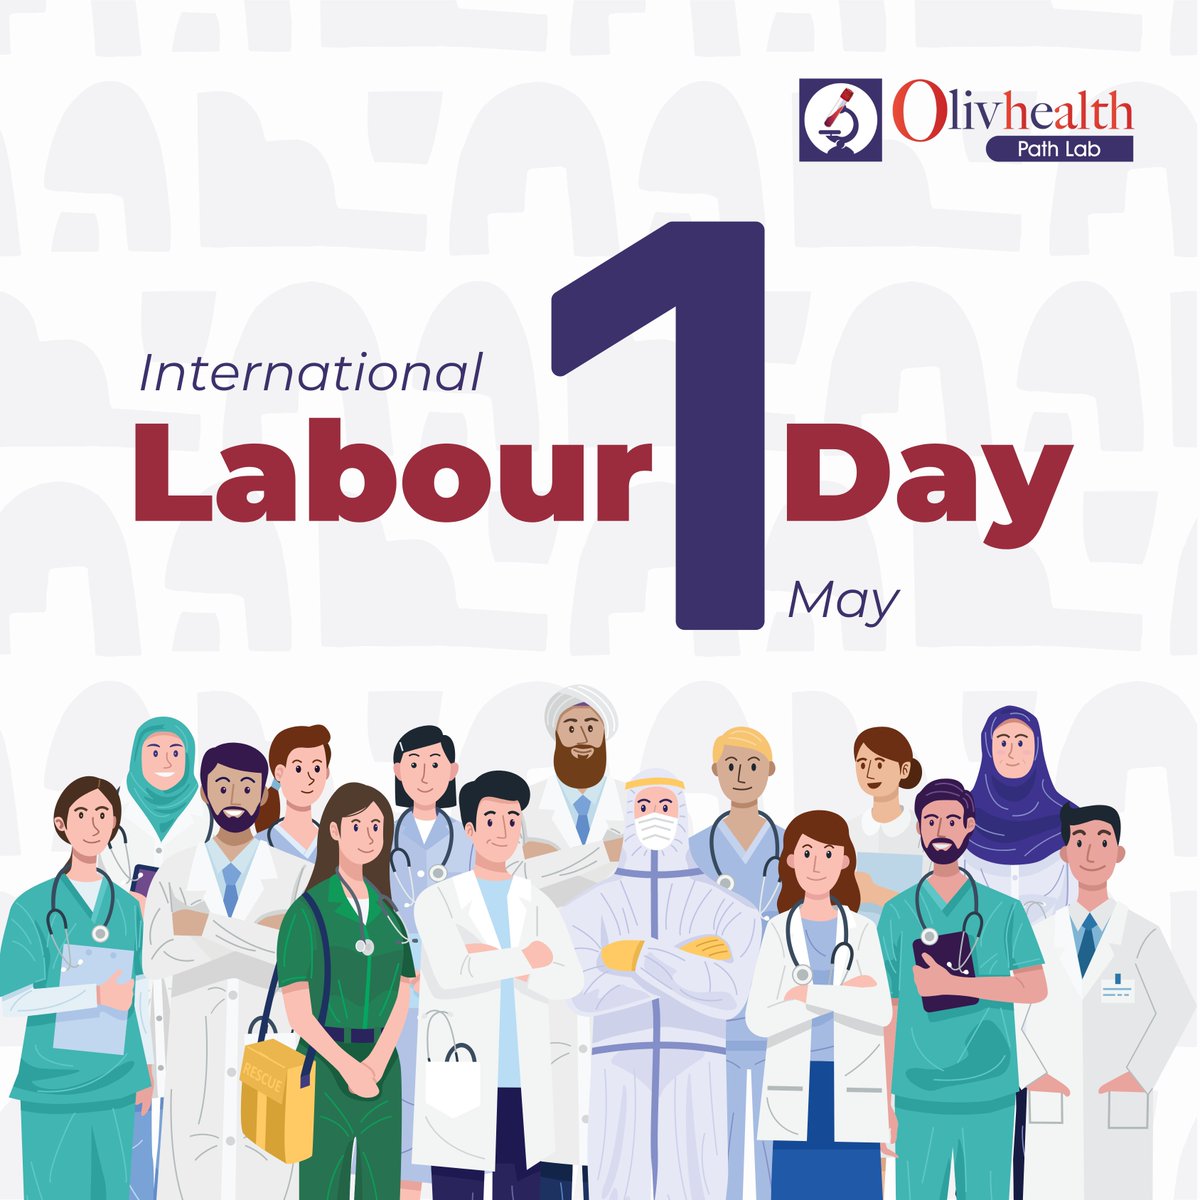 'Today, we celebrate the tireless efforts of workers worldwide. At OlivHealth Path Lab, we honor the dedication of every individual contributing to health and wellness. Happy International Labour Day!'

#Olivhealthpathlab #LabourDay #HealthHeroes #MayDay #1stMay